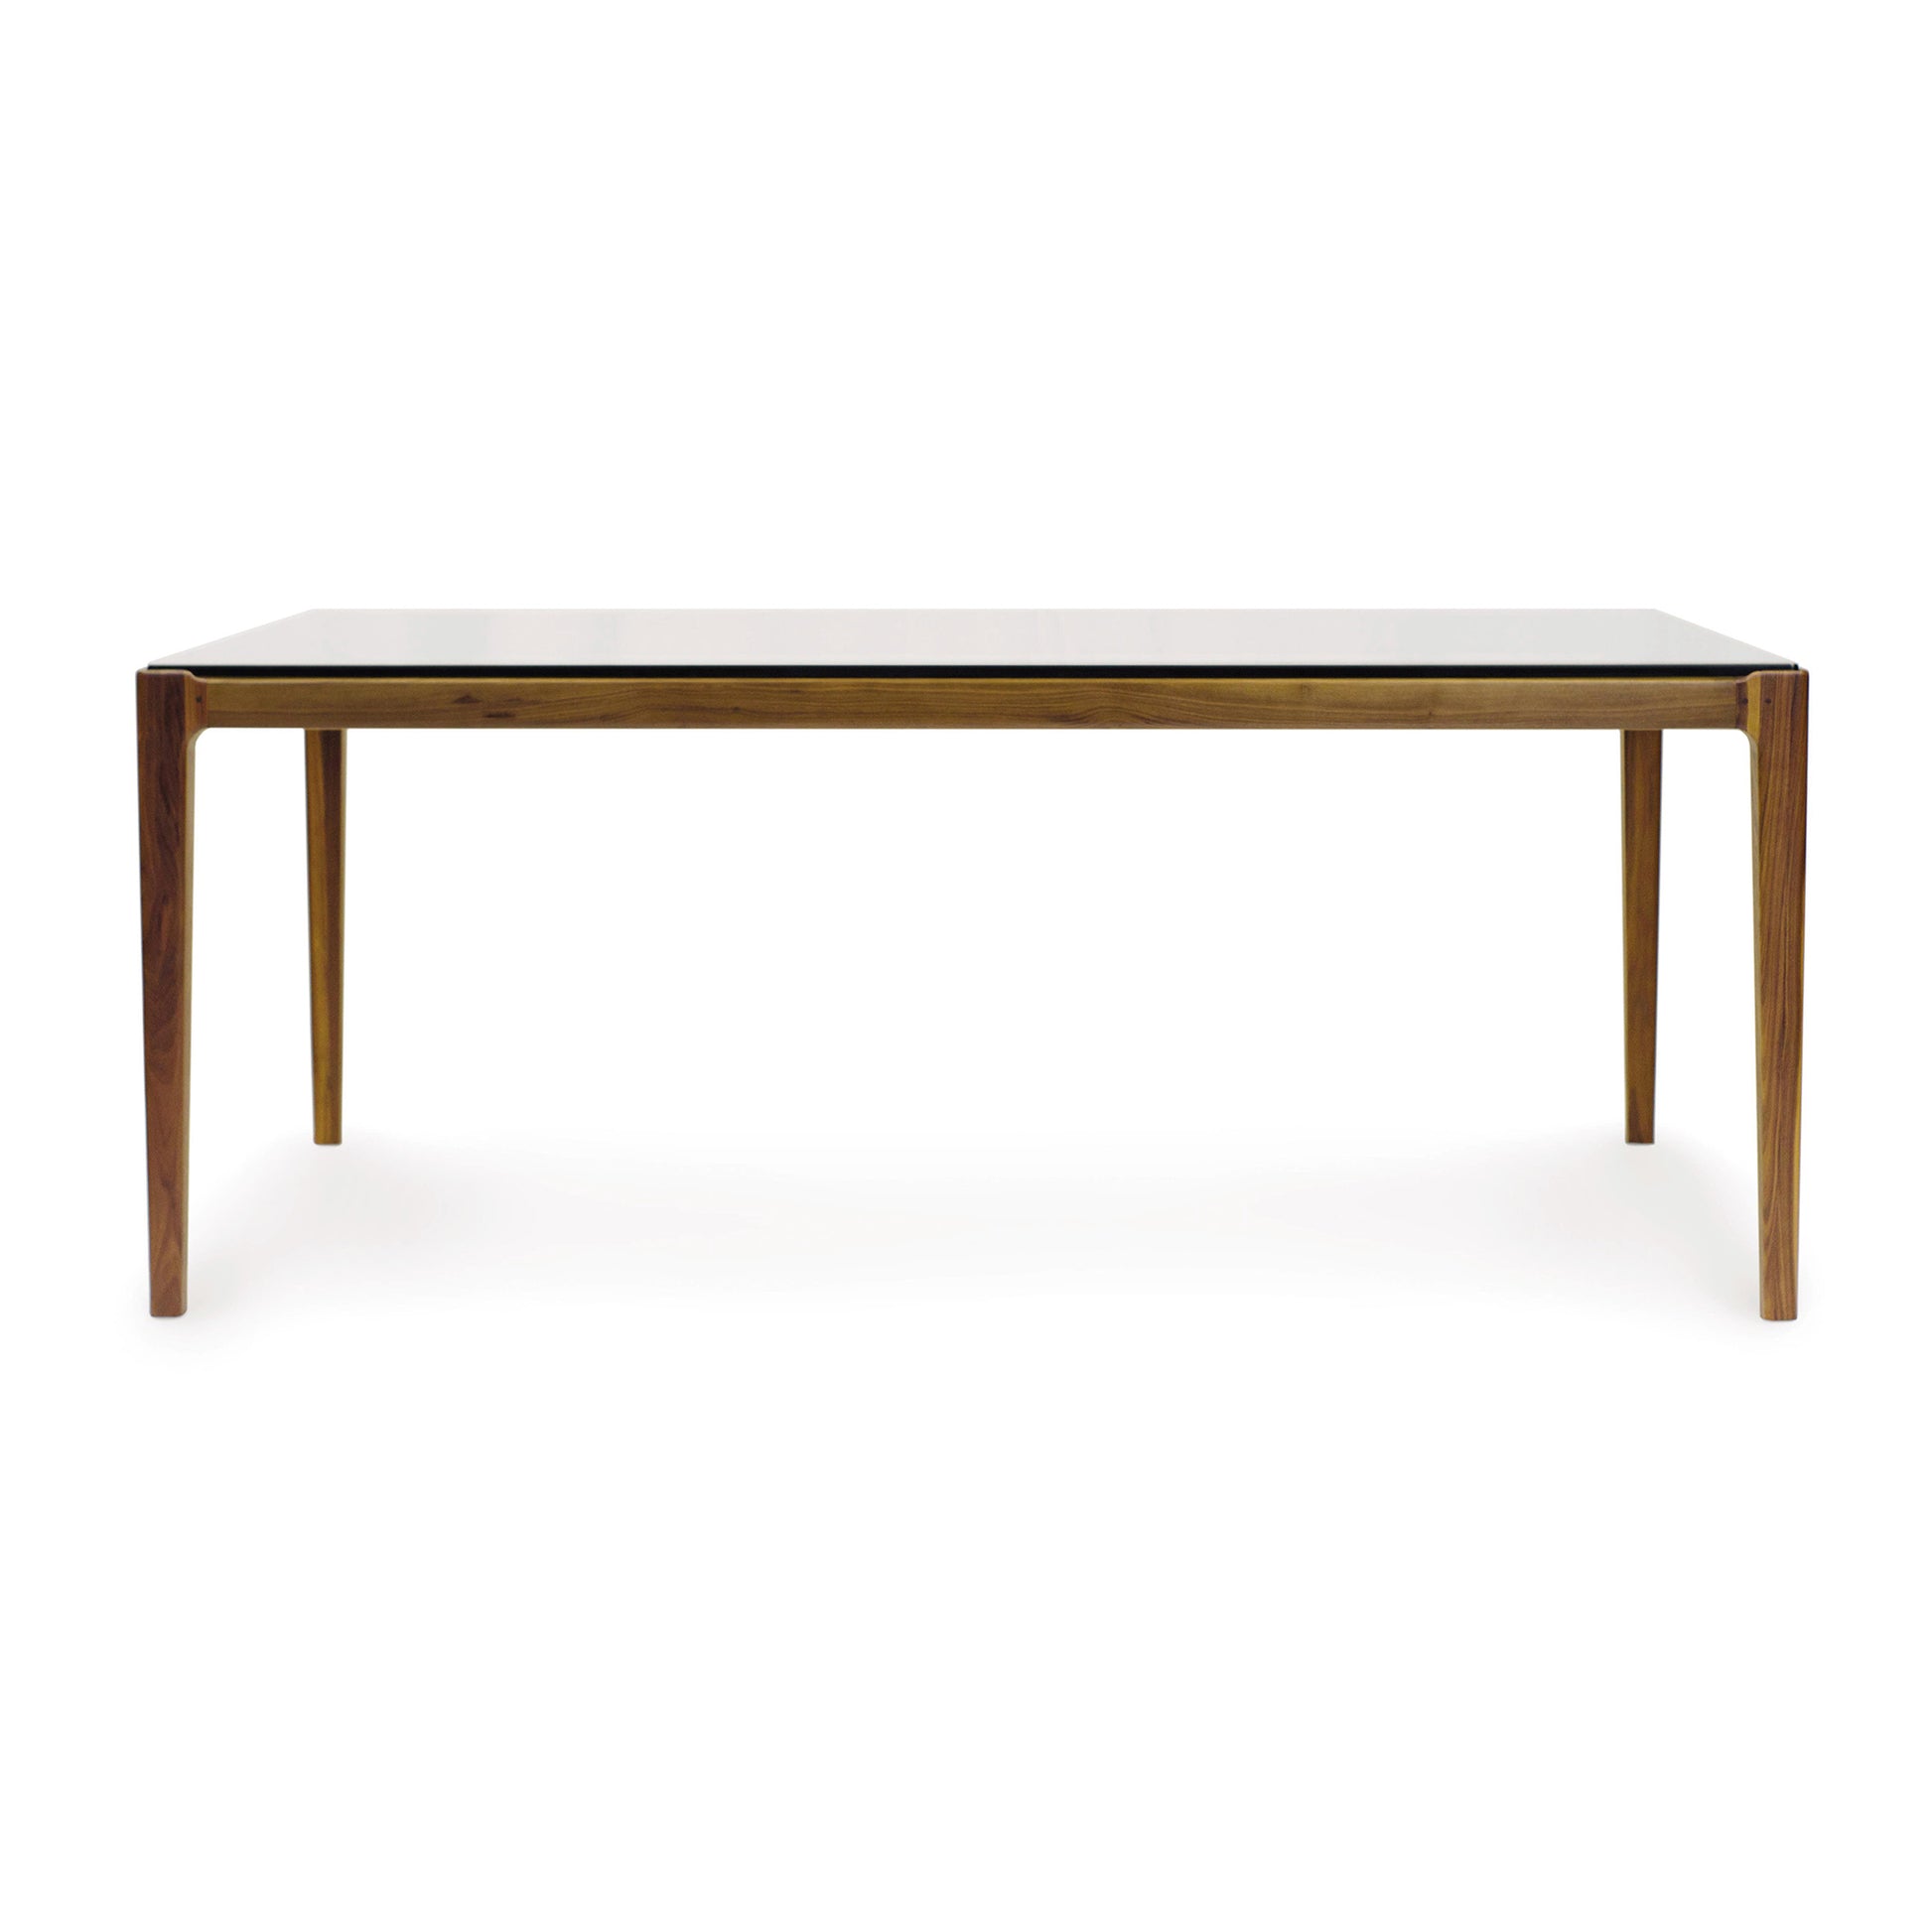 A natural walnut Lisse Glass Top Dining Table by Copeland Furniture with a minimalist design and a glass top.